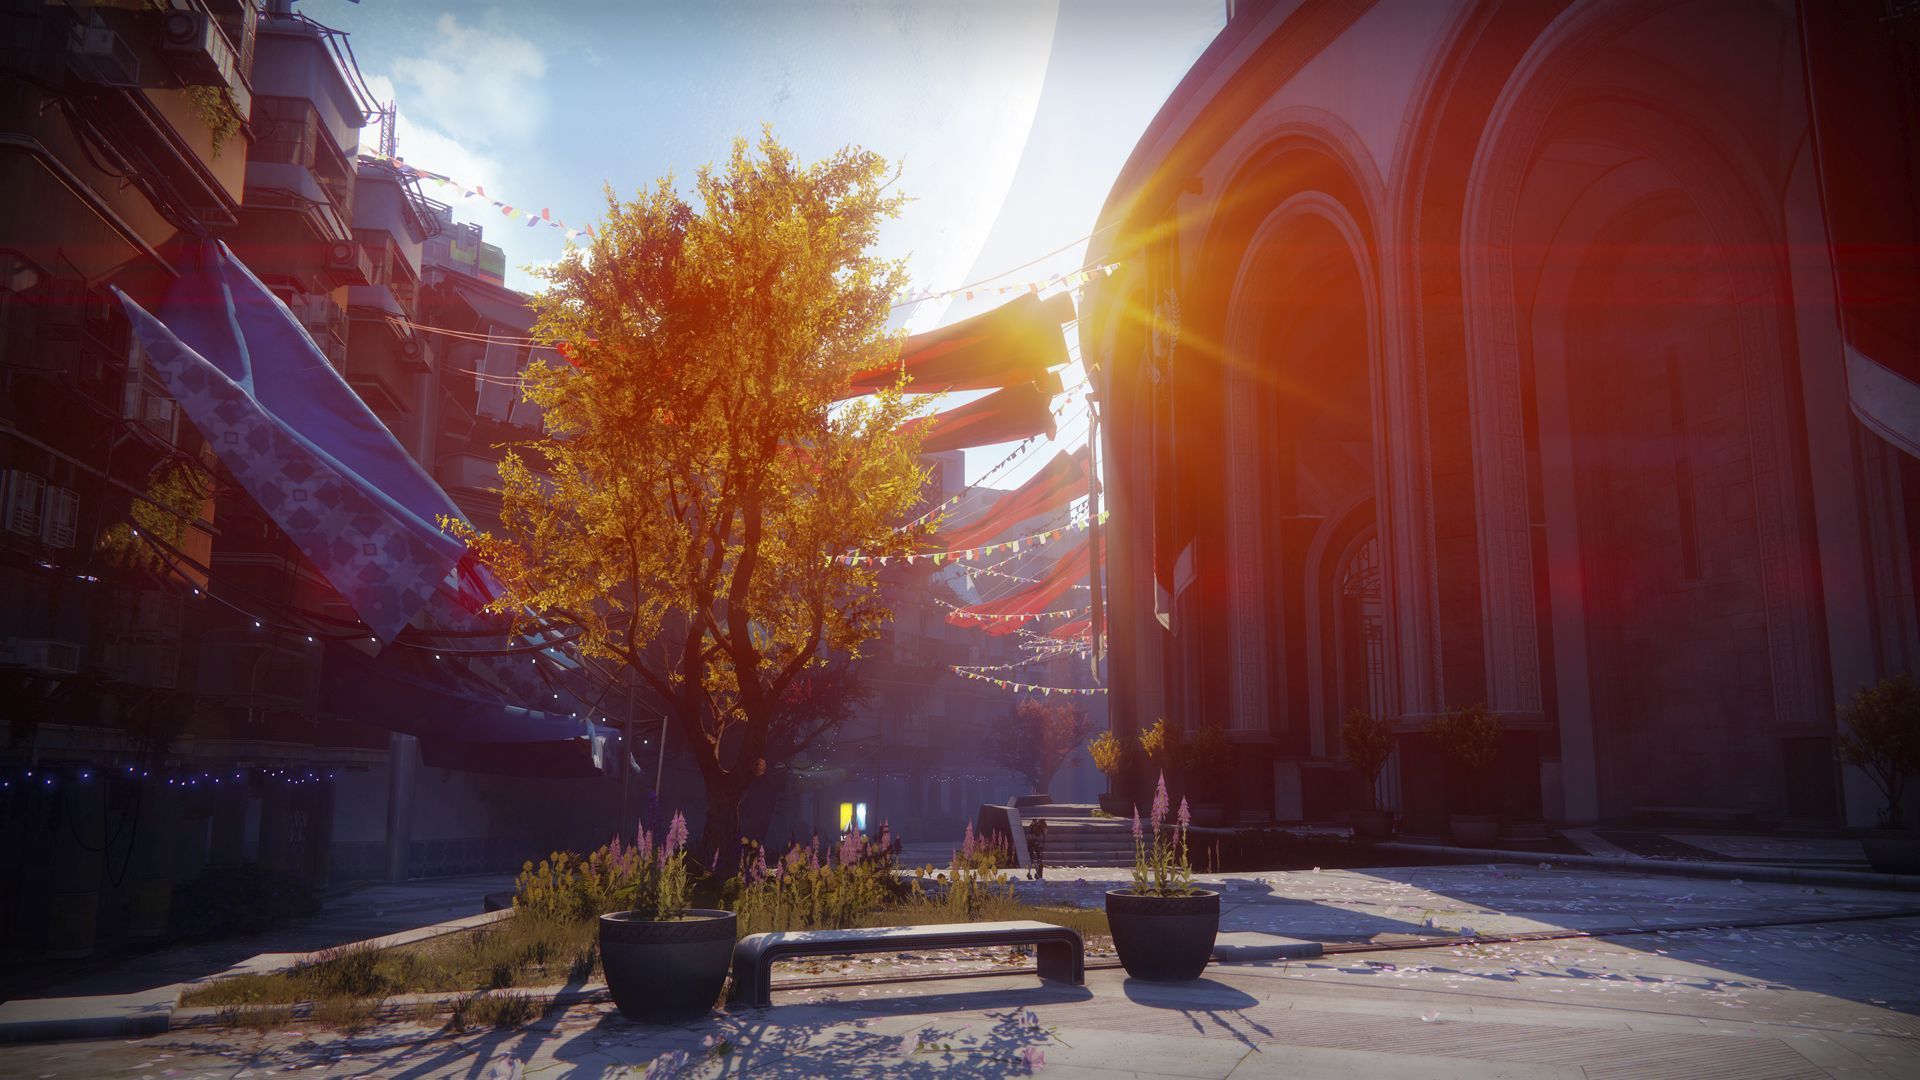 Destiny S Solstice Of Heroes Event Gets New Screenshots Showing New Gear Decorations And More